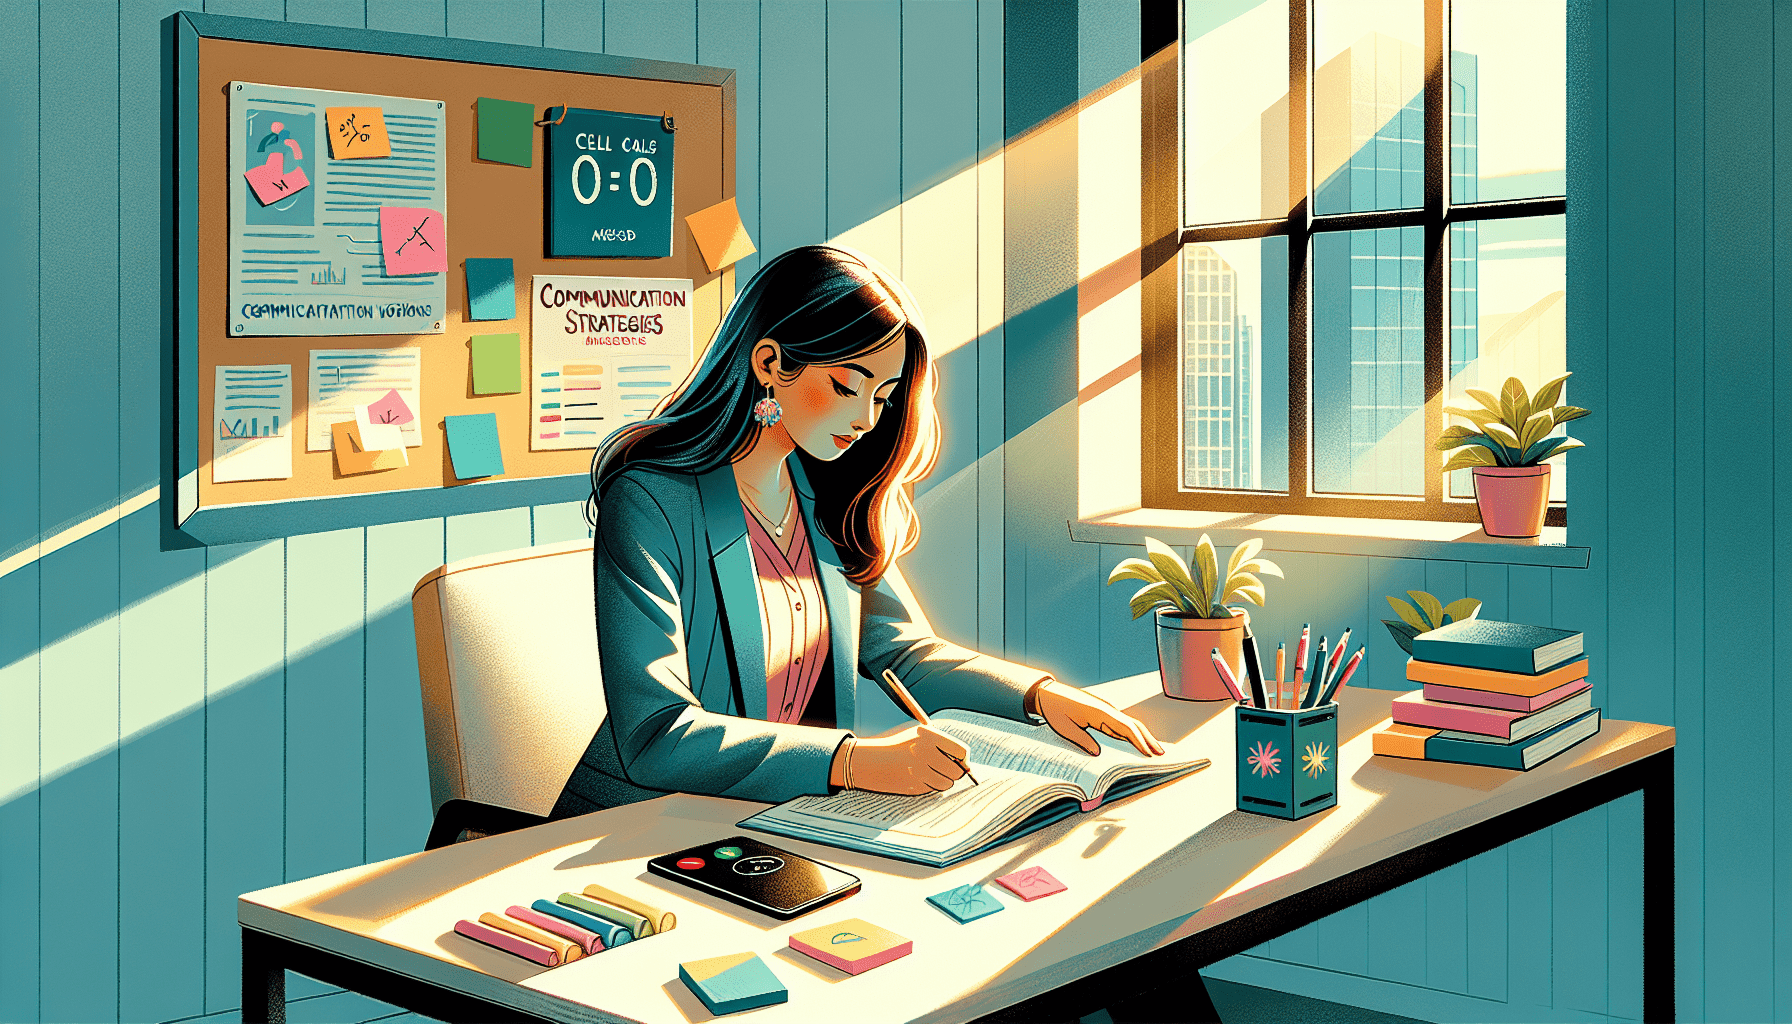 A serene office environment with a professional woman sitting at a modern desk, surrounded by sticky notes and a digital display showing missed calls, while she thoughtfully takes notes from a self-he